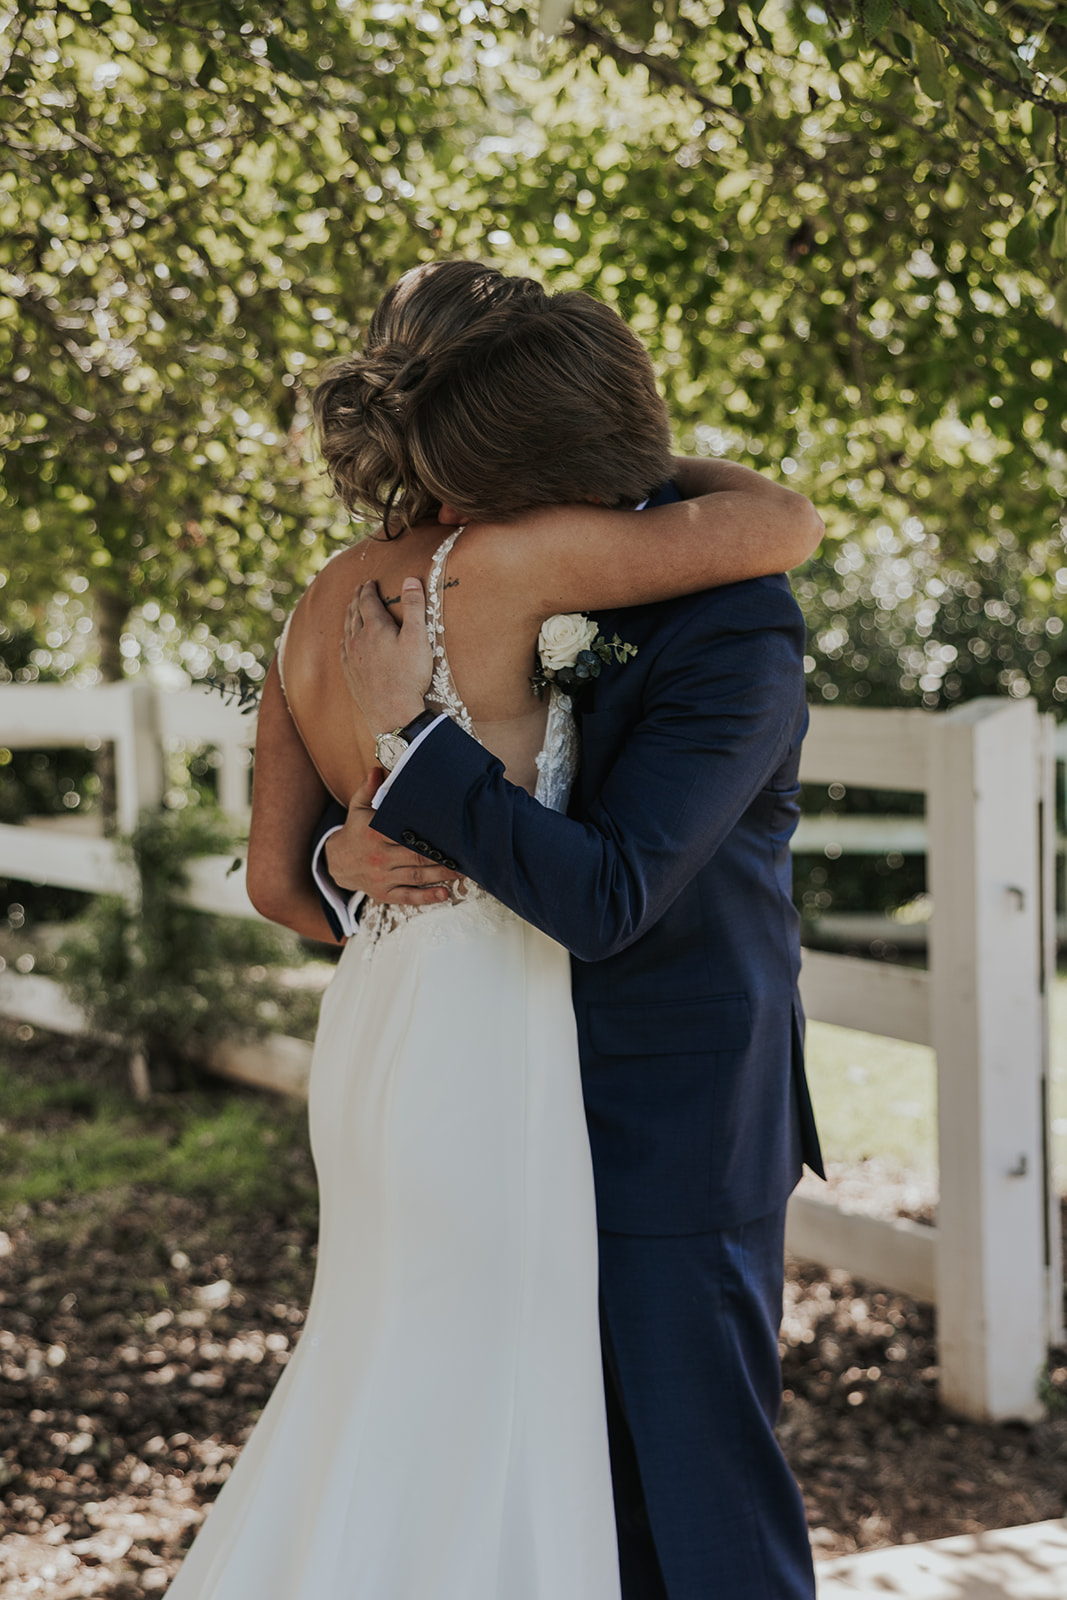 Stunning bride and groom take first look photos before their dreamy Georgia wedding day